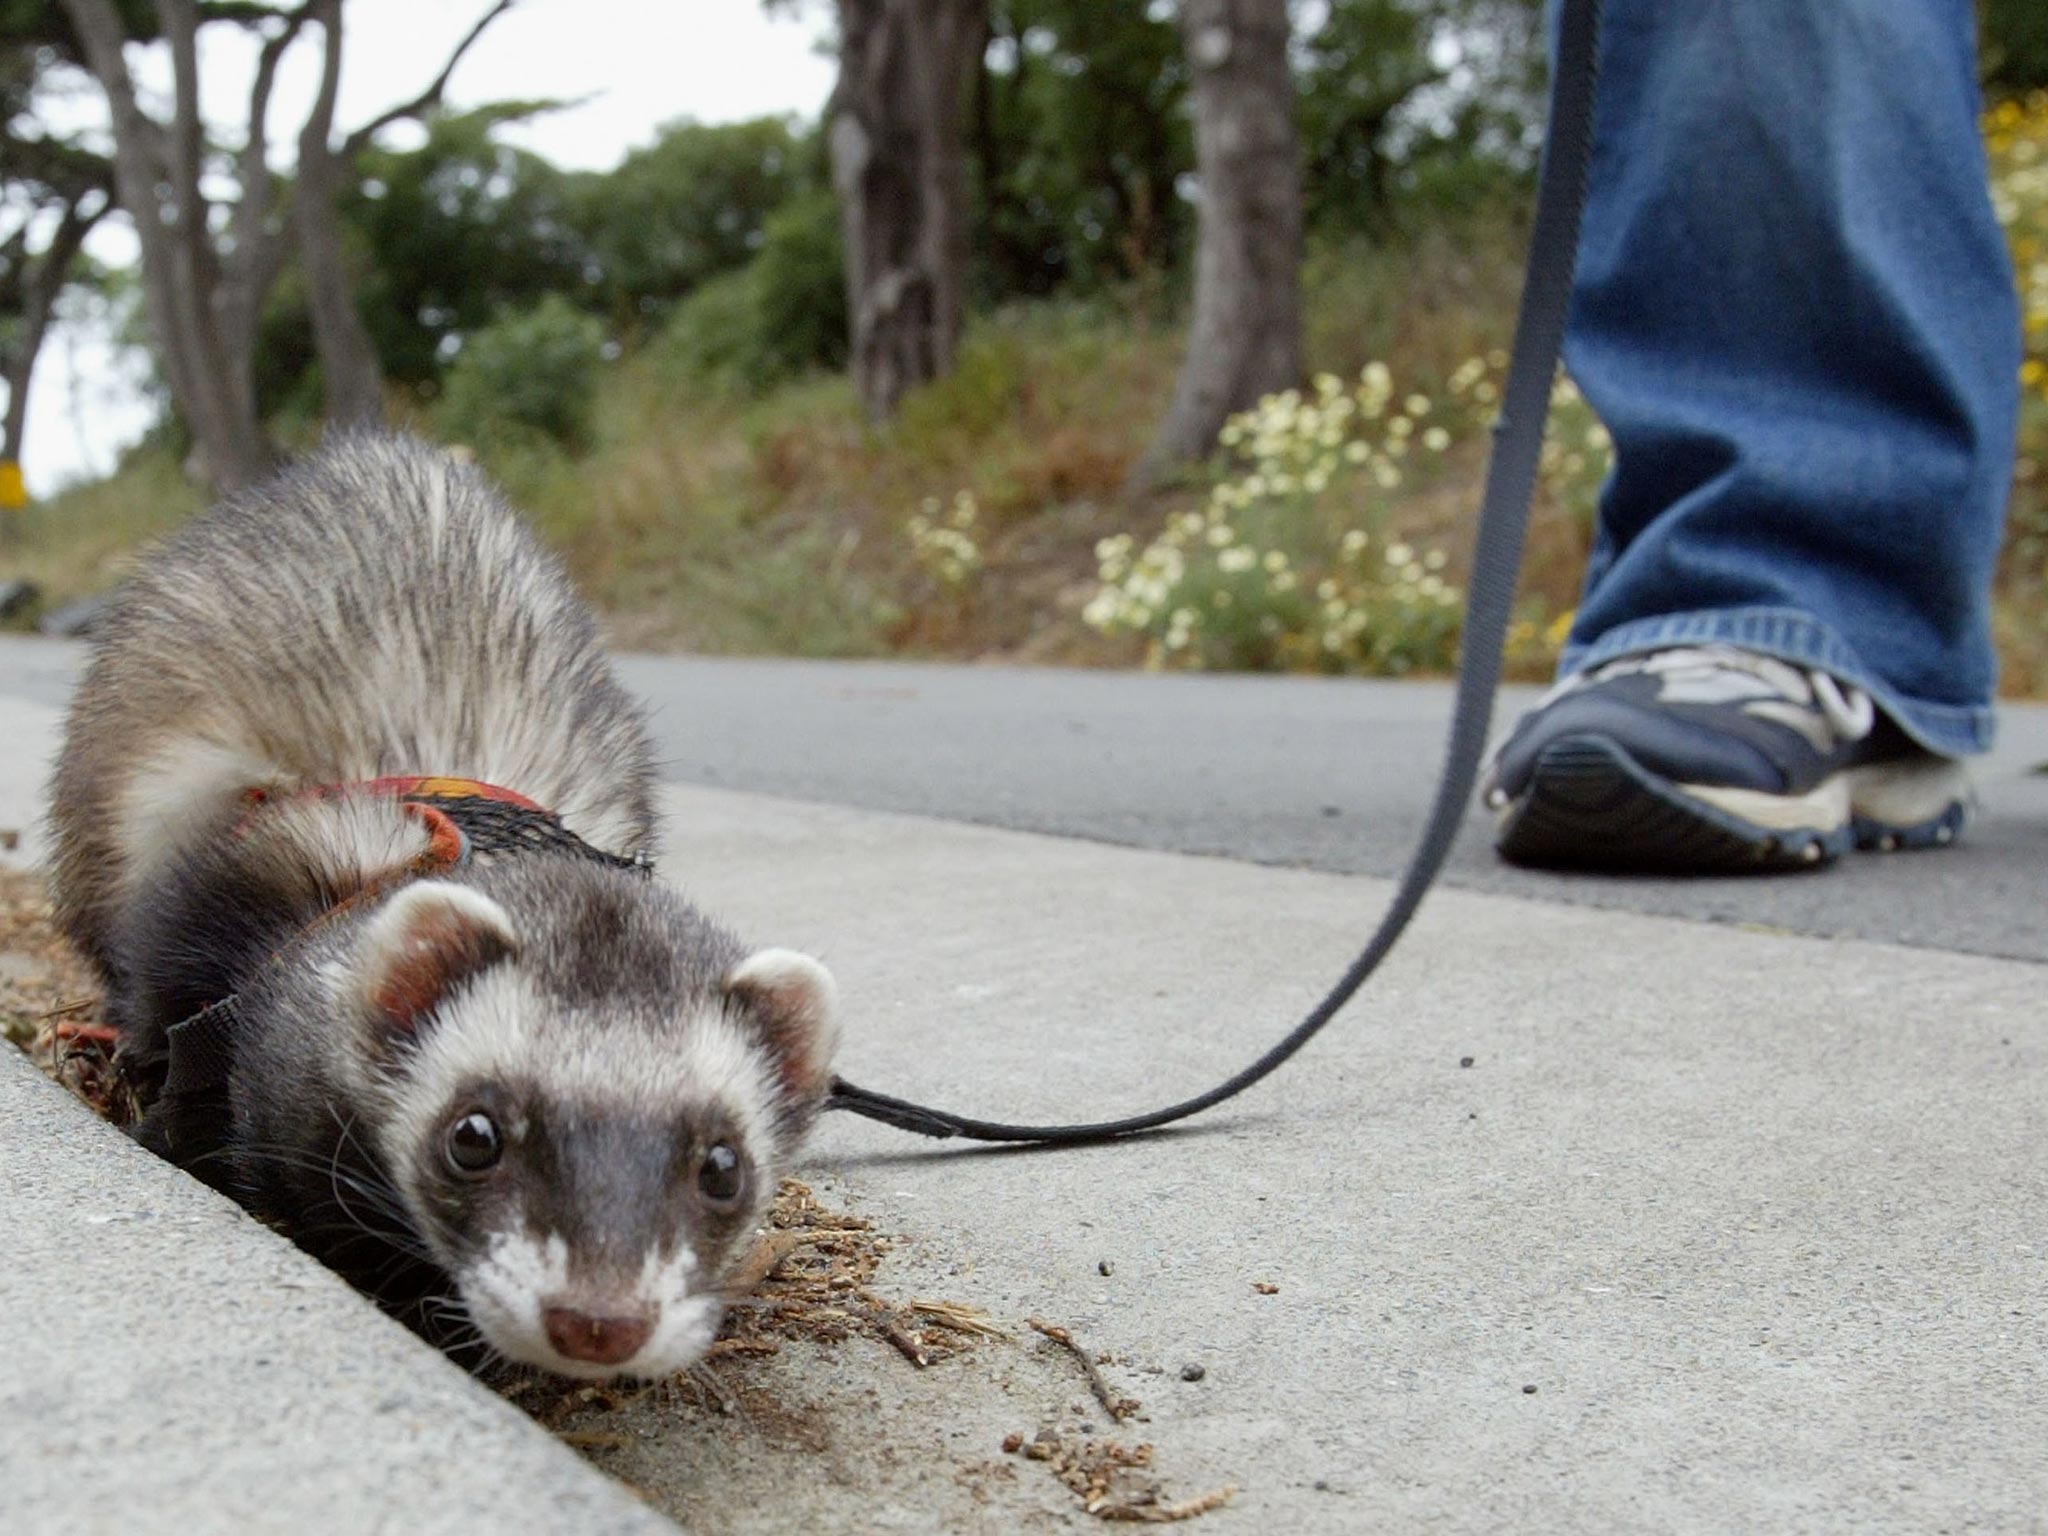 Ferrets were banned from the city in 1999 over fears they might spread rabies